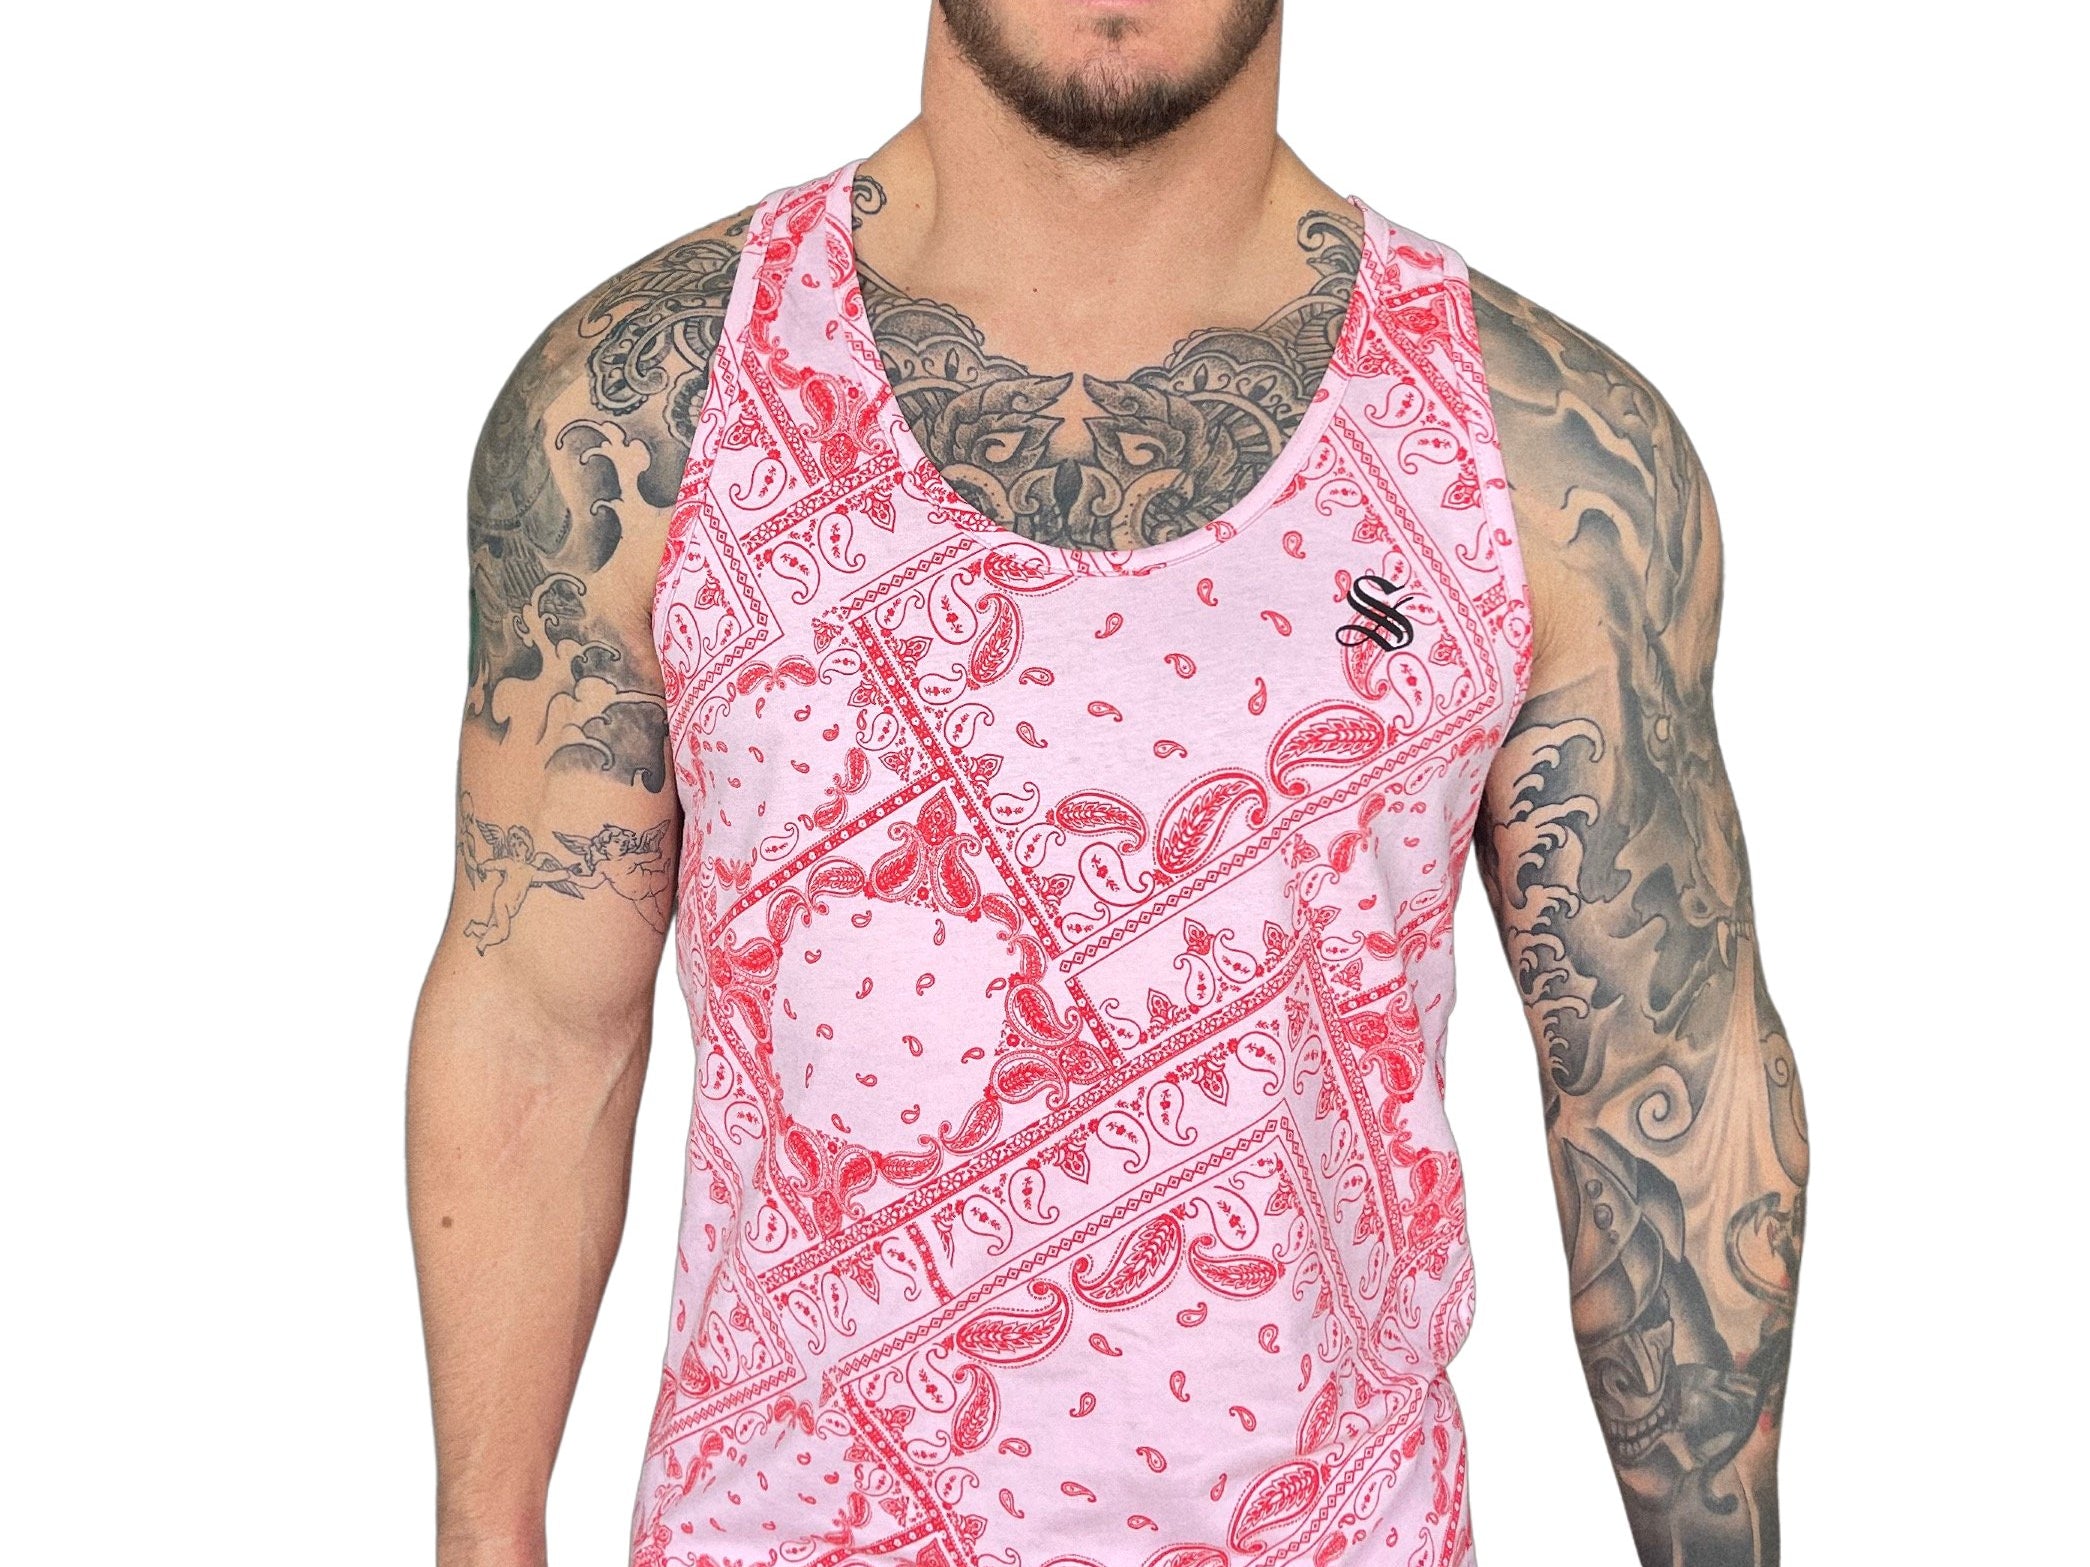 East - Red Tank Top for Men - Sarman Fashion - Wholesale Clothing Fashion Brand for Men from Canada